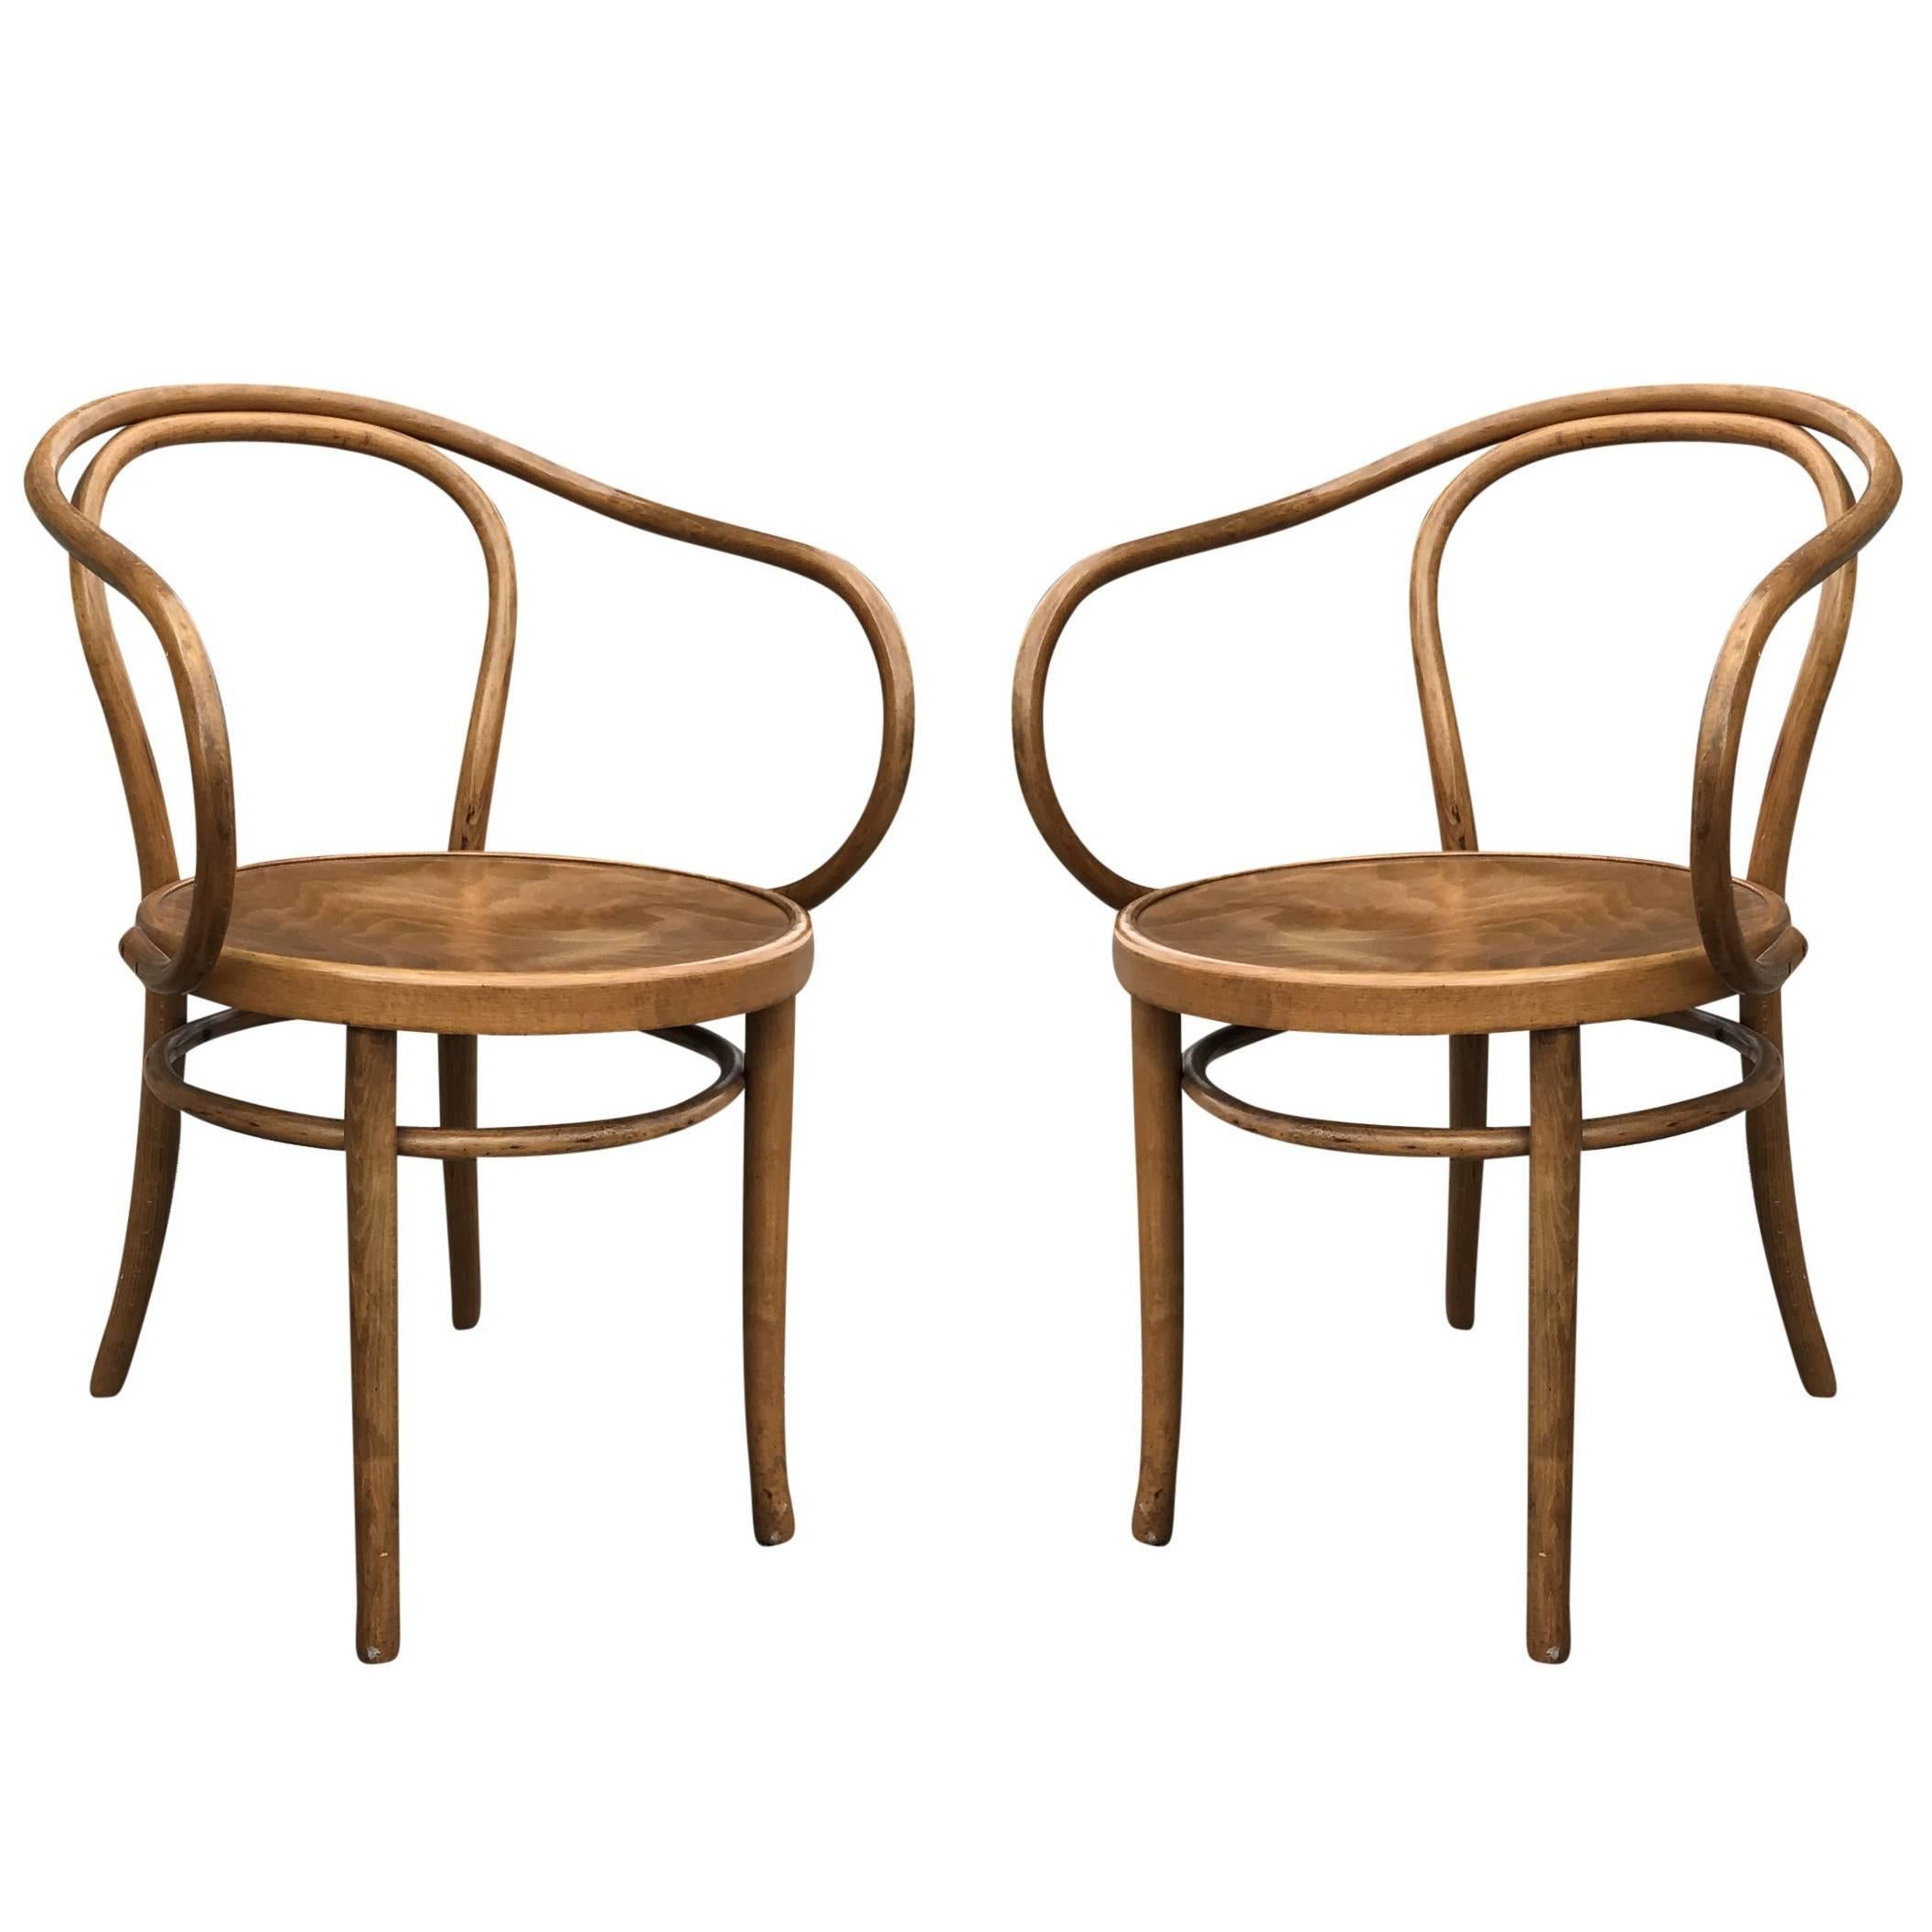 Pair of Thonet Bentwood Modern Armchairs